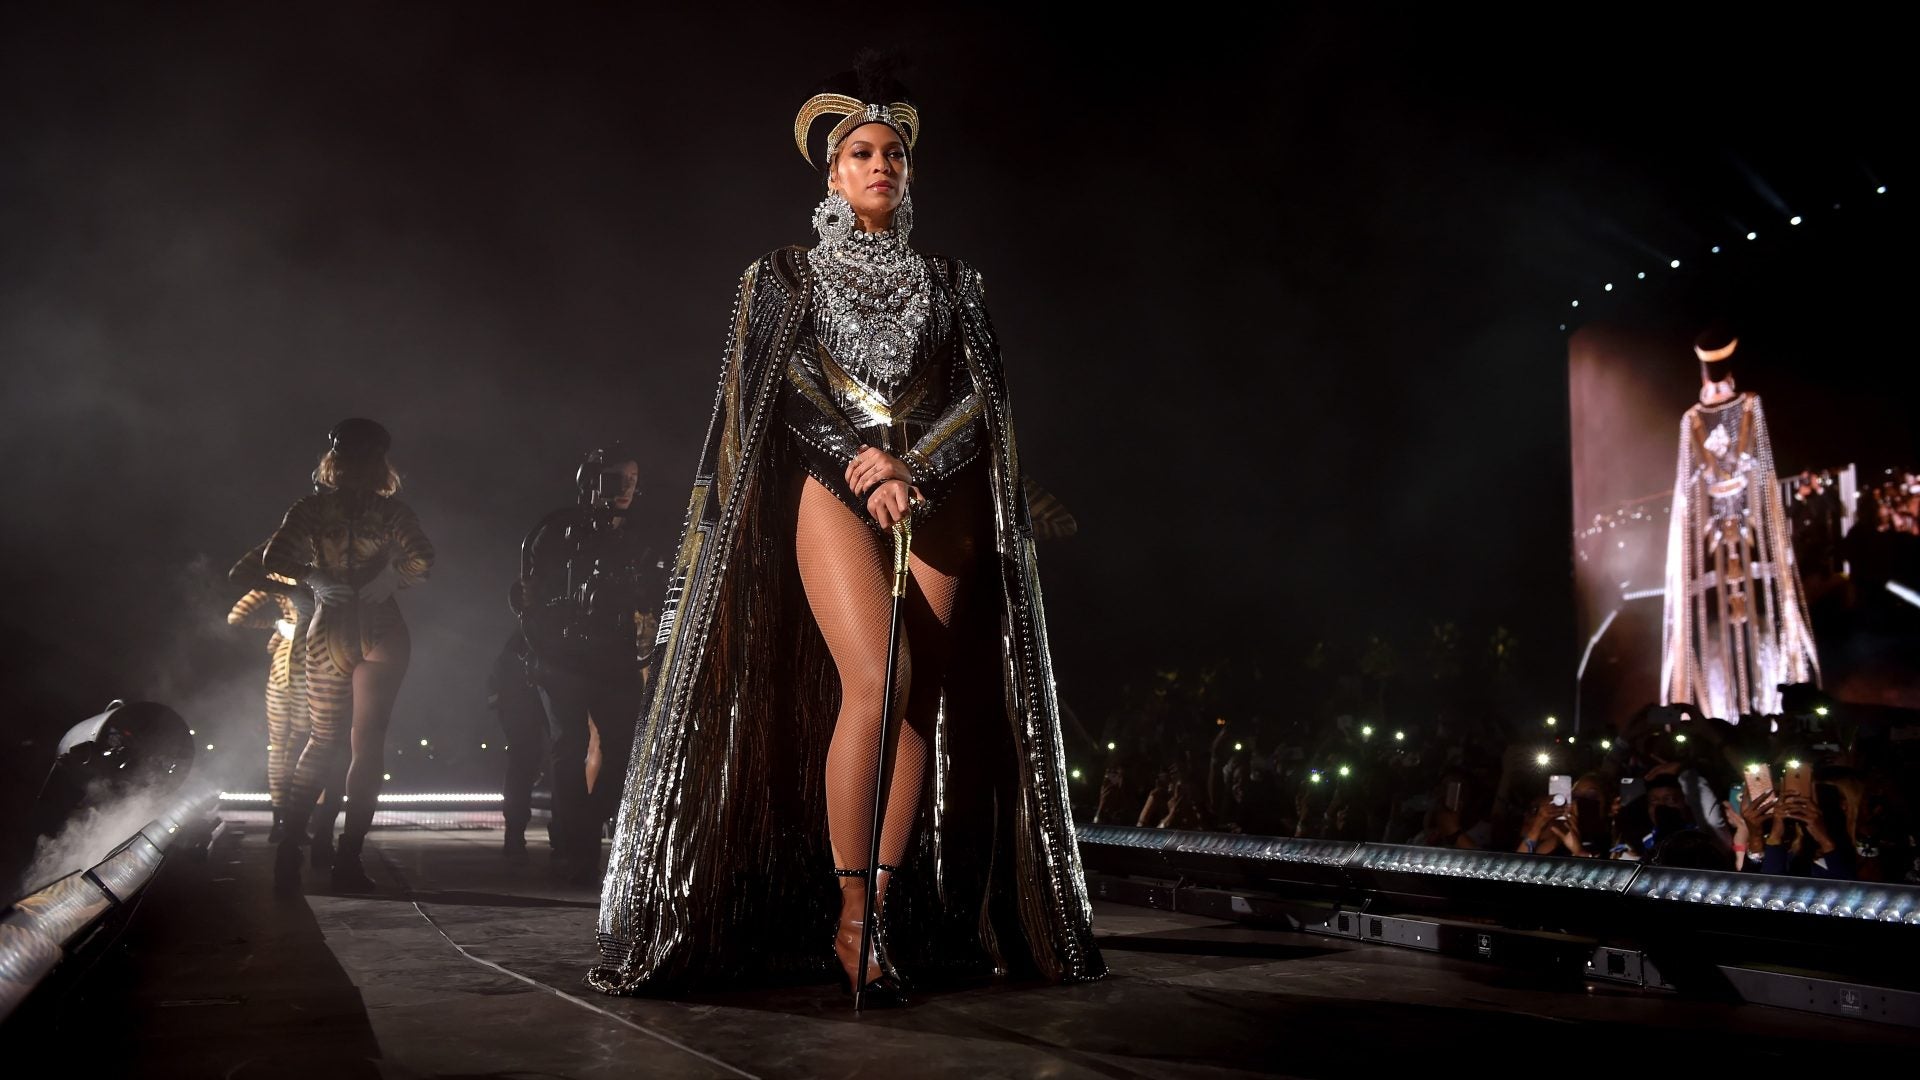 #HOMEcoming: Beyoncé-Approved 'Homecoming' Watch Party Goes Viral